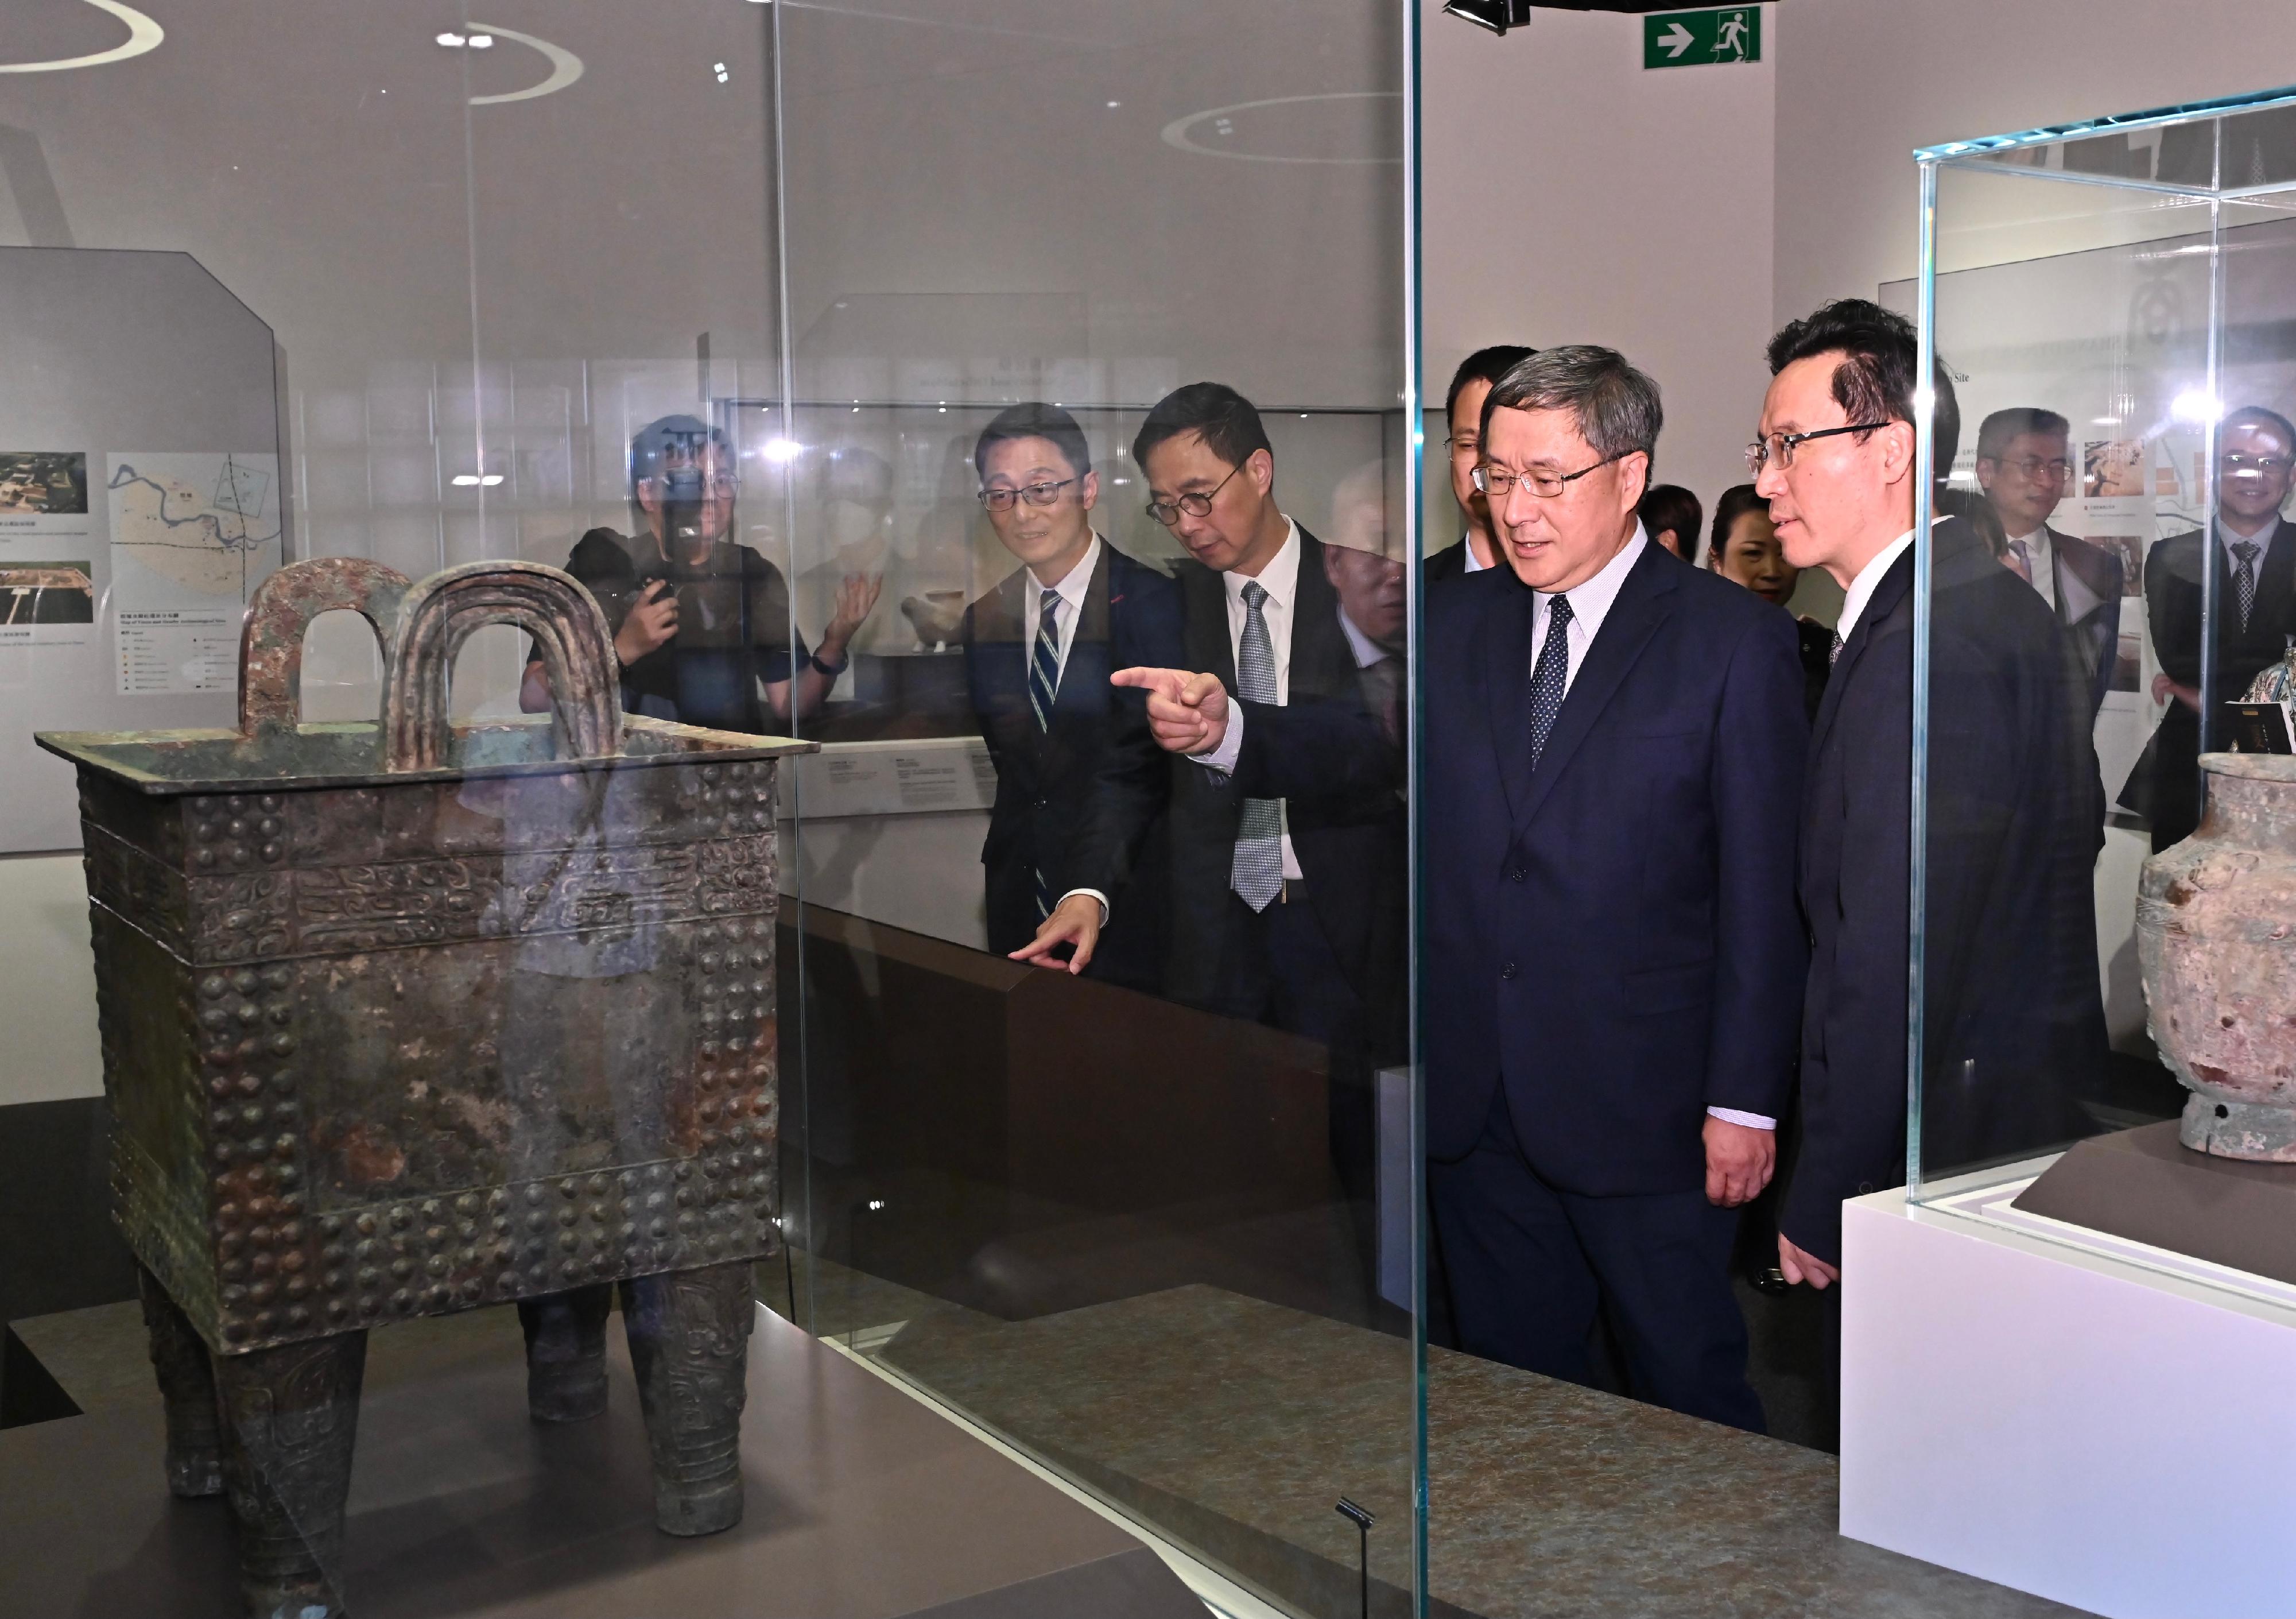 The Deputy Chief Secretary for Administration, Mr Cheuk Wing-hing, attended the opening ceremony of "The Hong Kong Jockey Club Series: The Ancient Civilisation of the Xia, Shang and Zhou Dynasties in Henan Province" today (April 2). Photo shows (from right) the Director of the Henan Provincial Administration of Cultural Heritage, Dr Ren Wei; Mr Cheuk, the Secretary for Culture, Sports and Tourism, Mr Kevin Yeung; and the Director of Leisure and Cultural Services, Mr Vincent Liu, touring the exhibition.